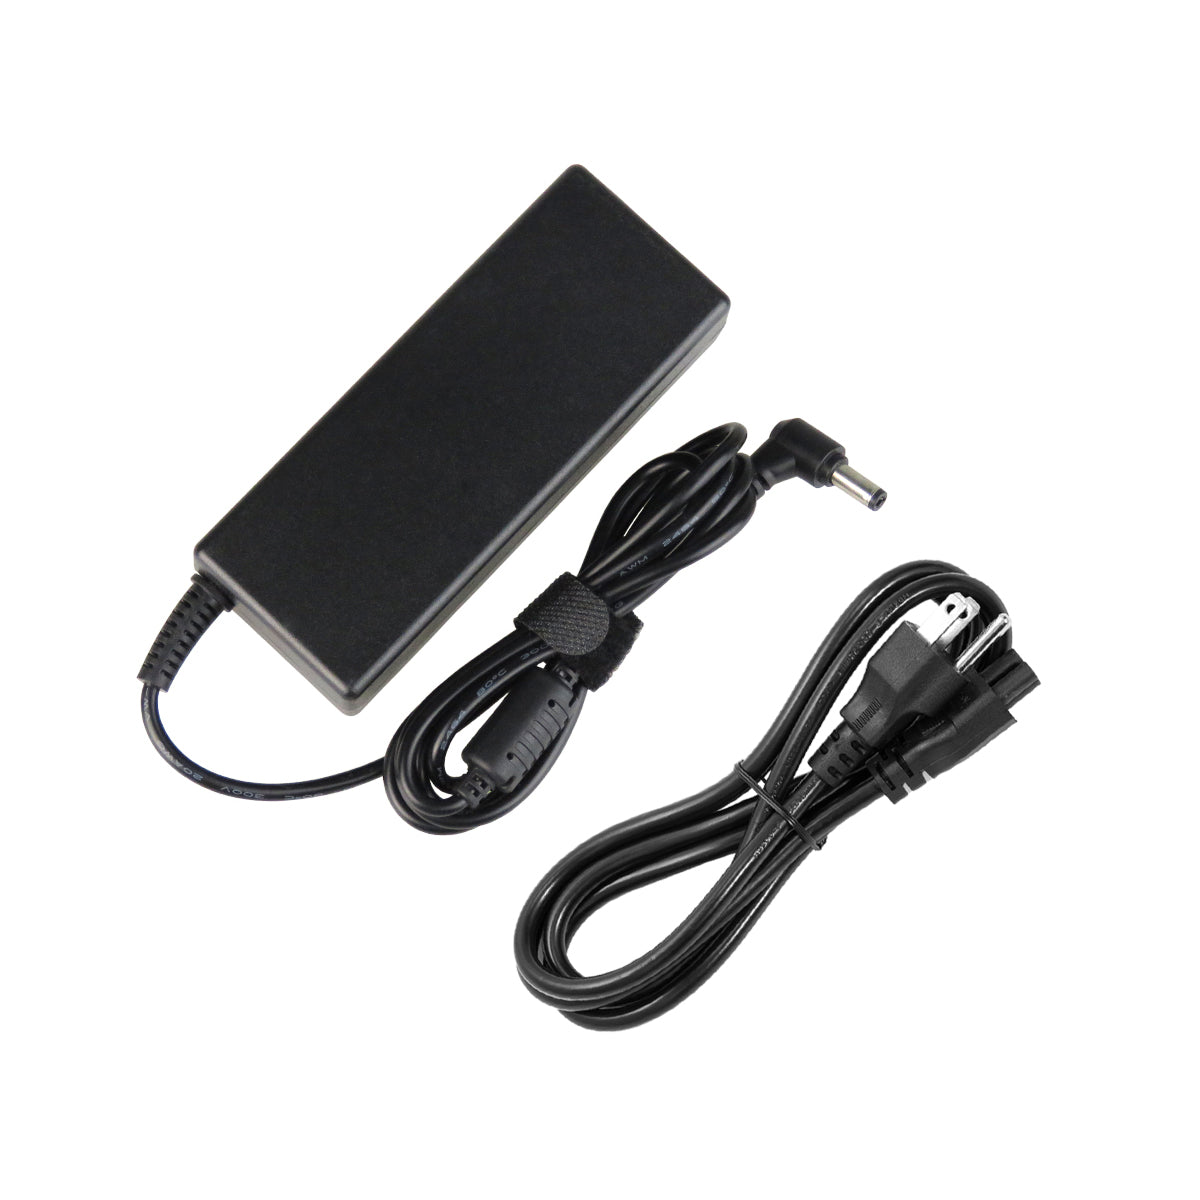 AC Adapter Charger for ASUS V1 Notebook.